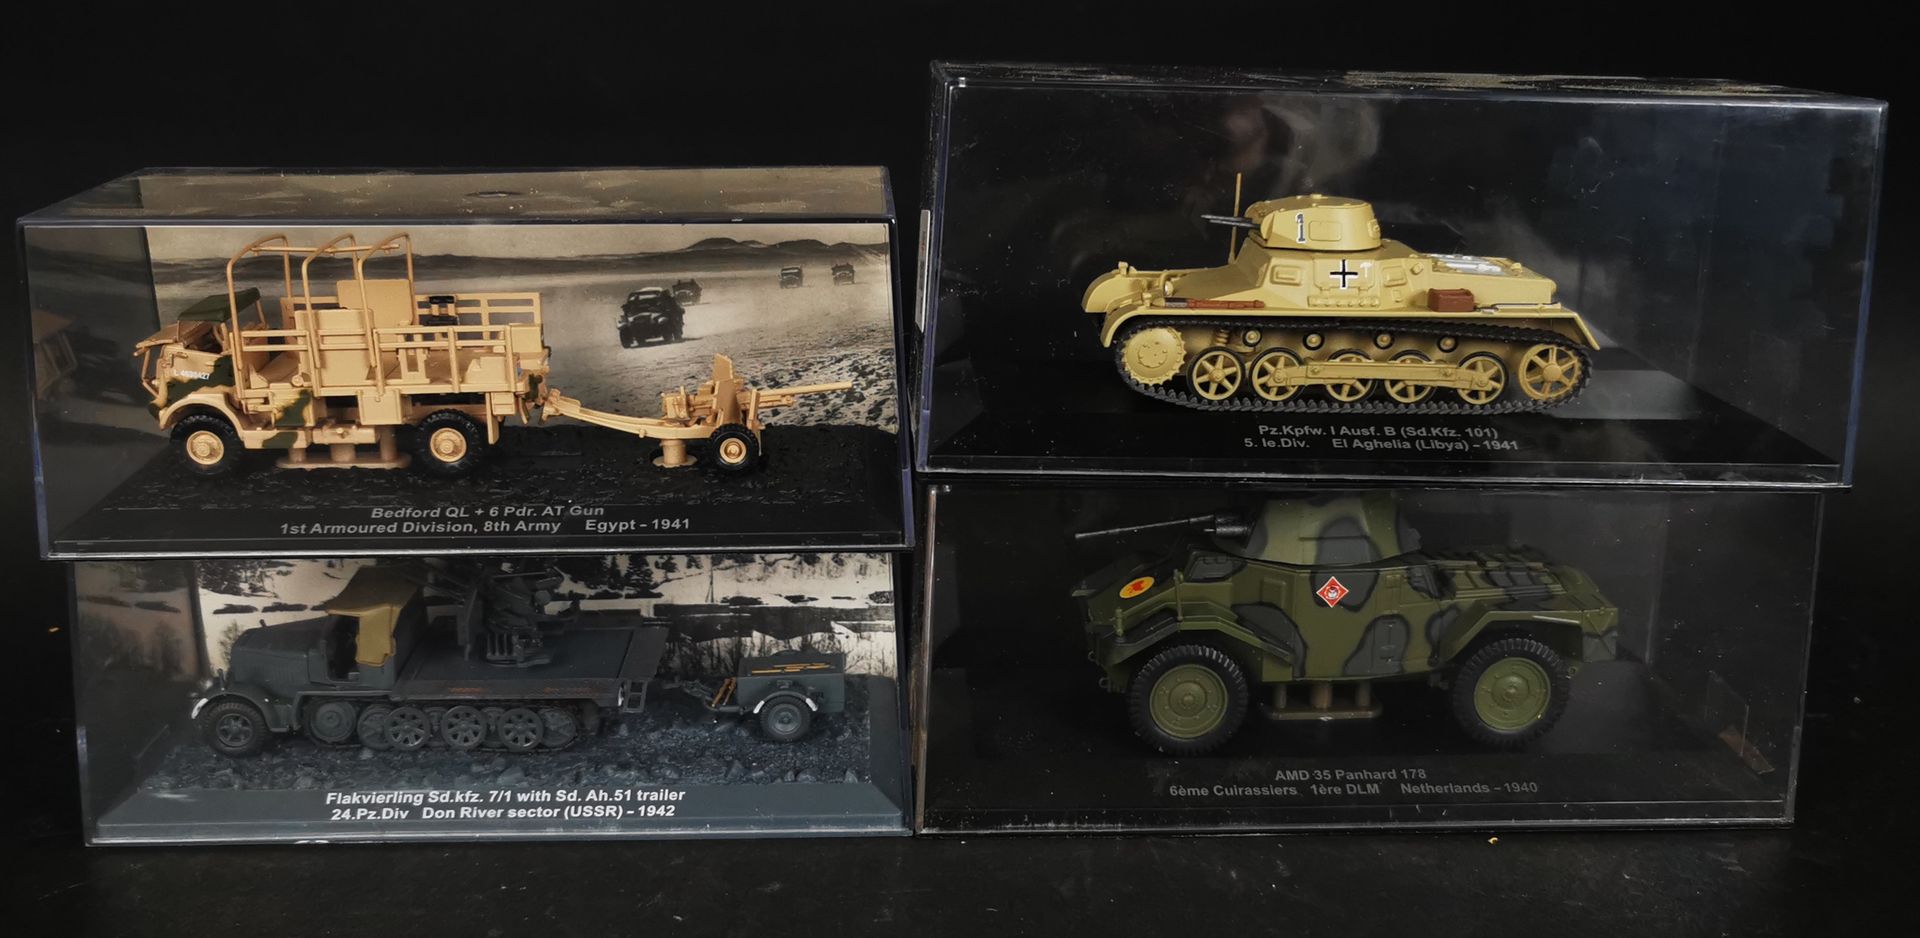 Null Set of 4 military vehicles including AMD 35 PANHARD 178